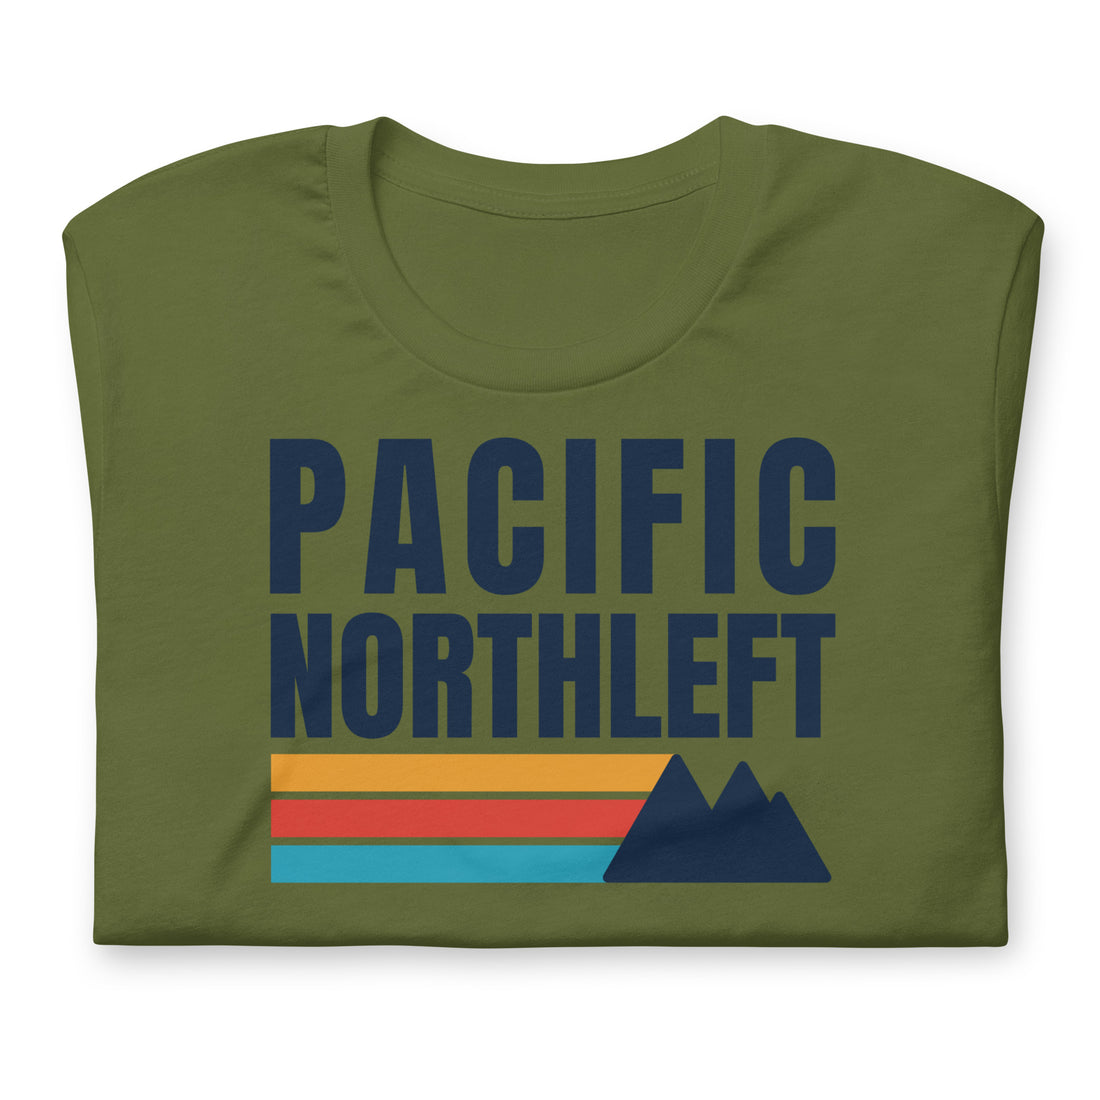 Pacific Northleft T-Shirt